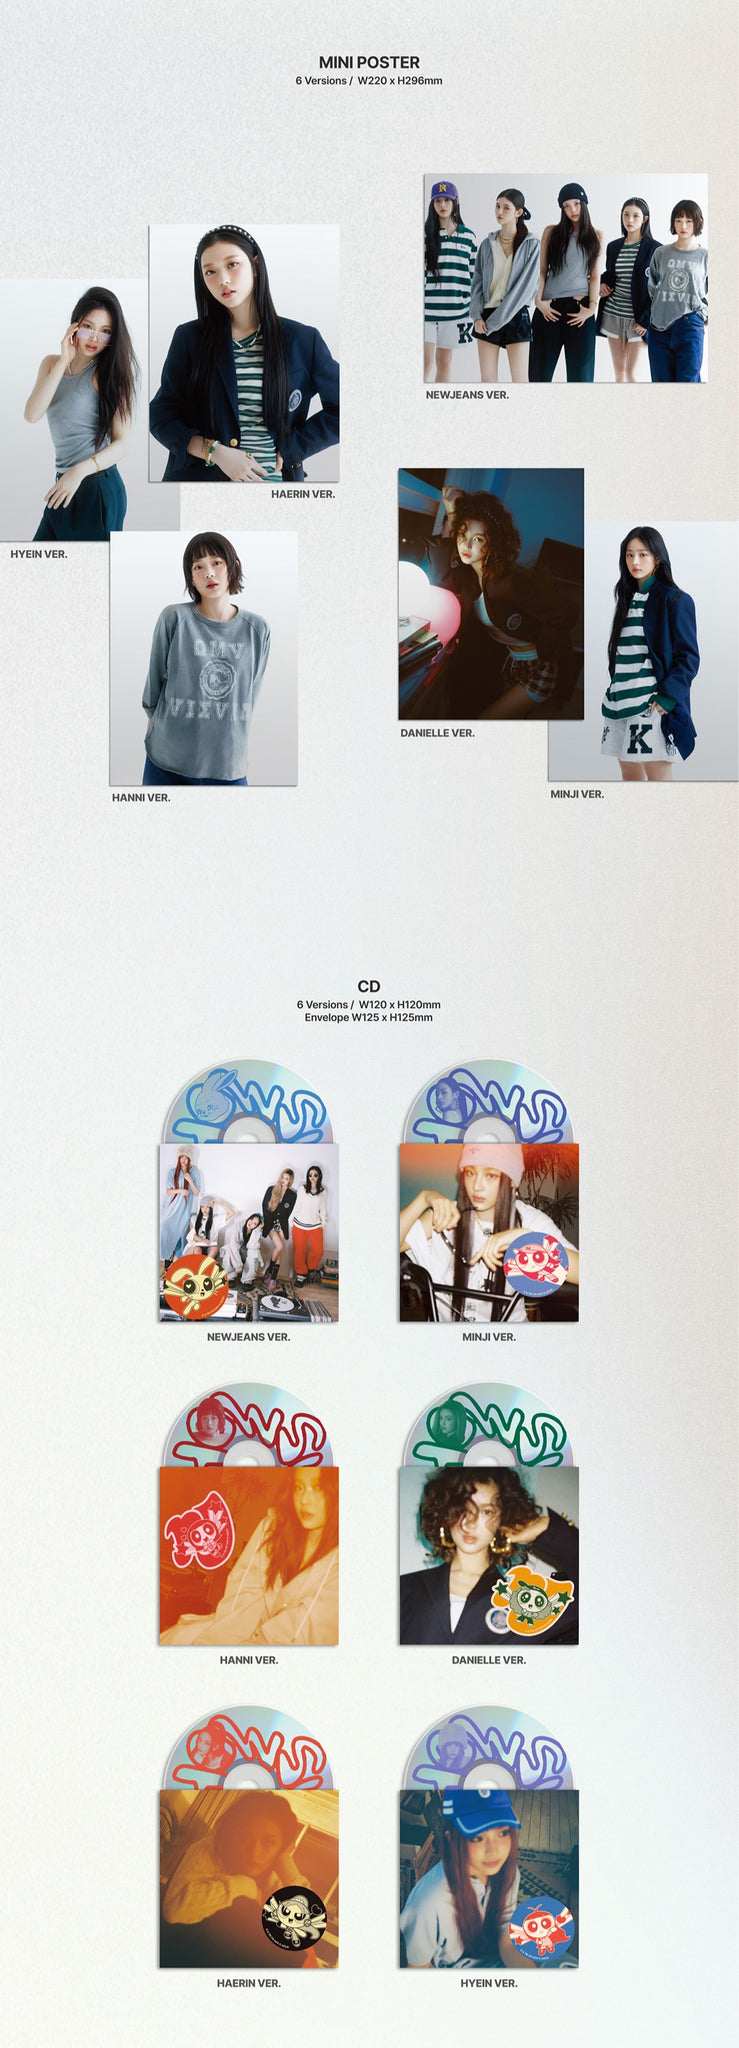 NewJeans 2nd Single Album How Sweet - Standard Version Inclusions: Mini Poster, CD & Envelope